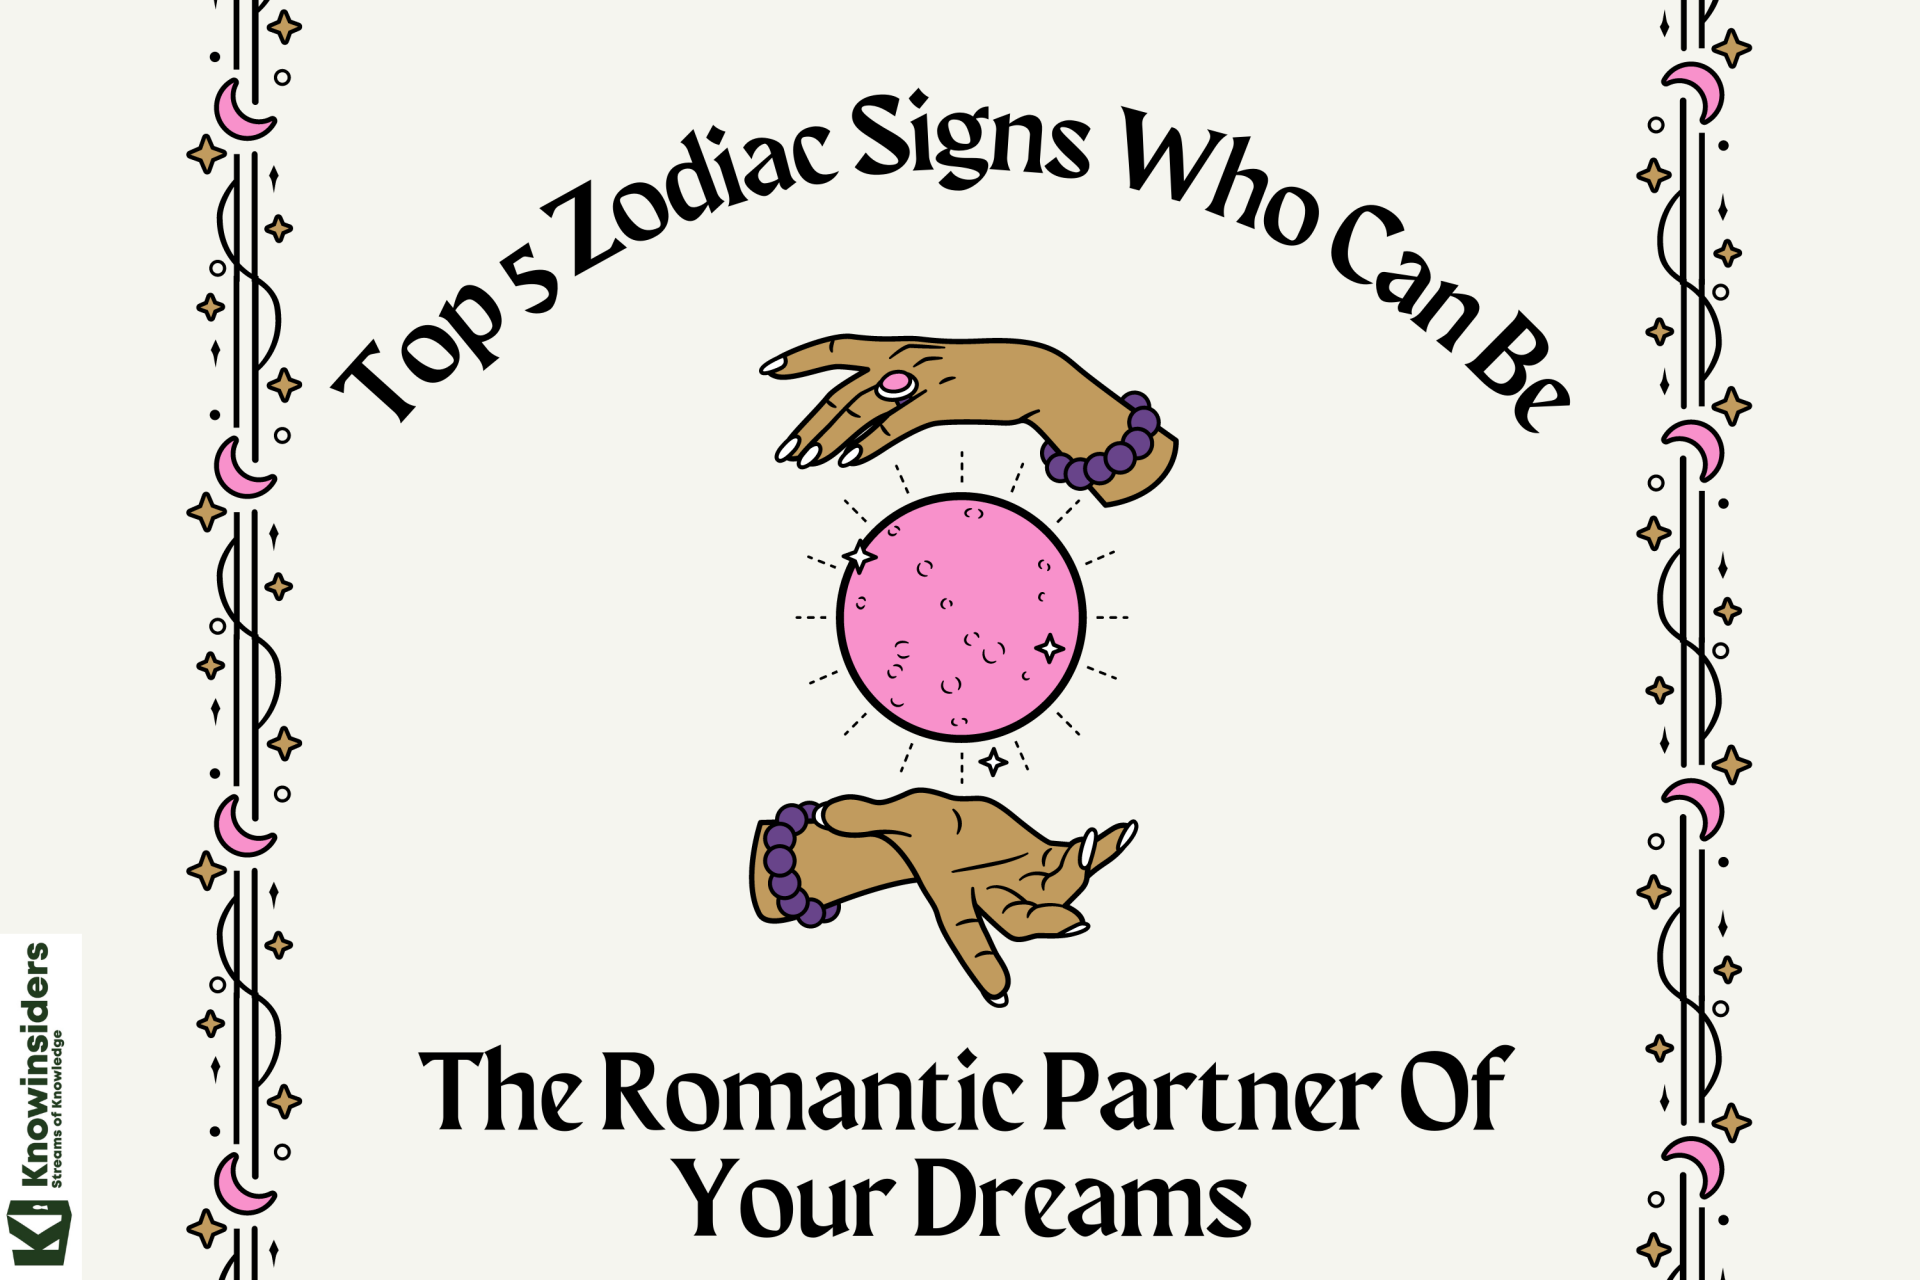 Top 5 Zodiac Signs Who Can Be The Romantic Partner Of Your Dreams